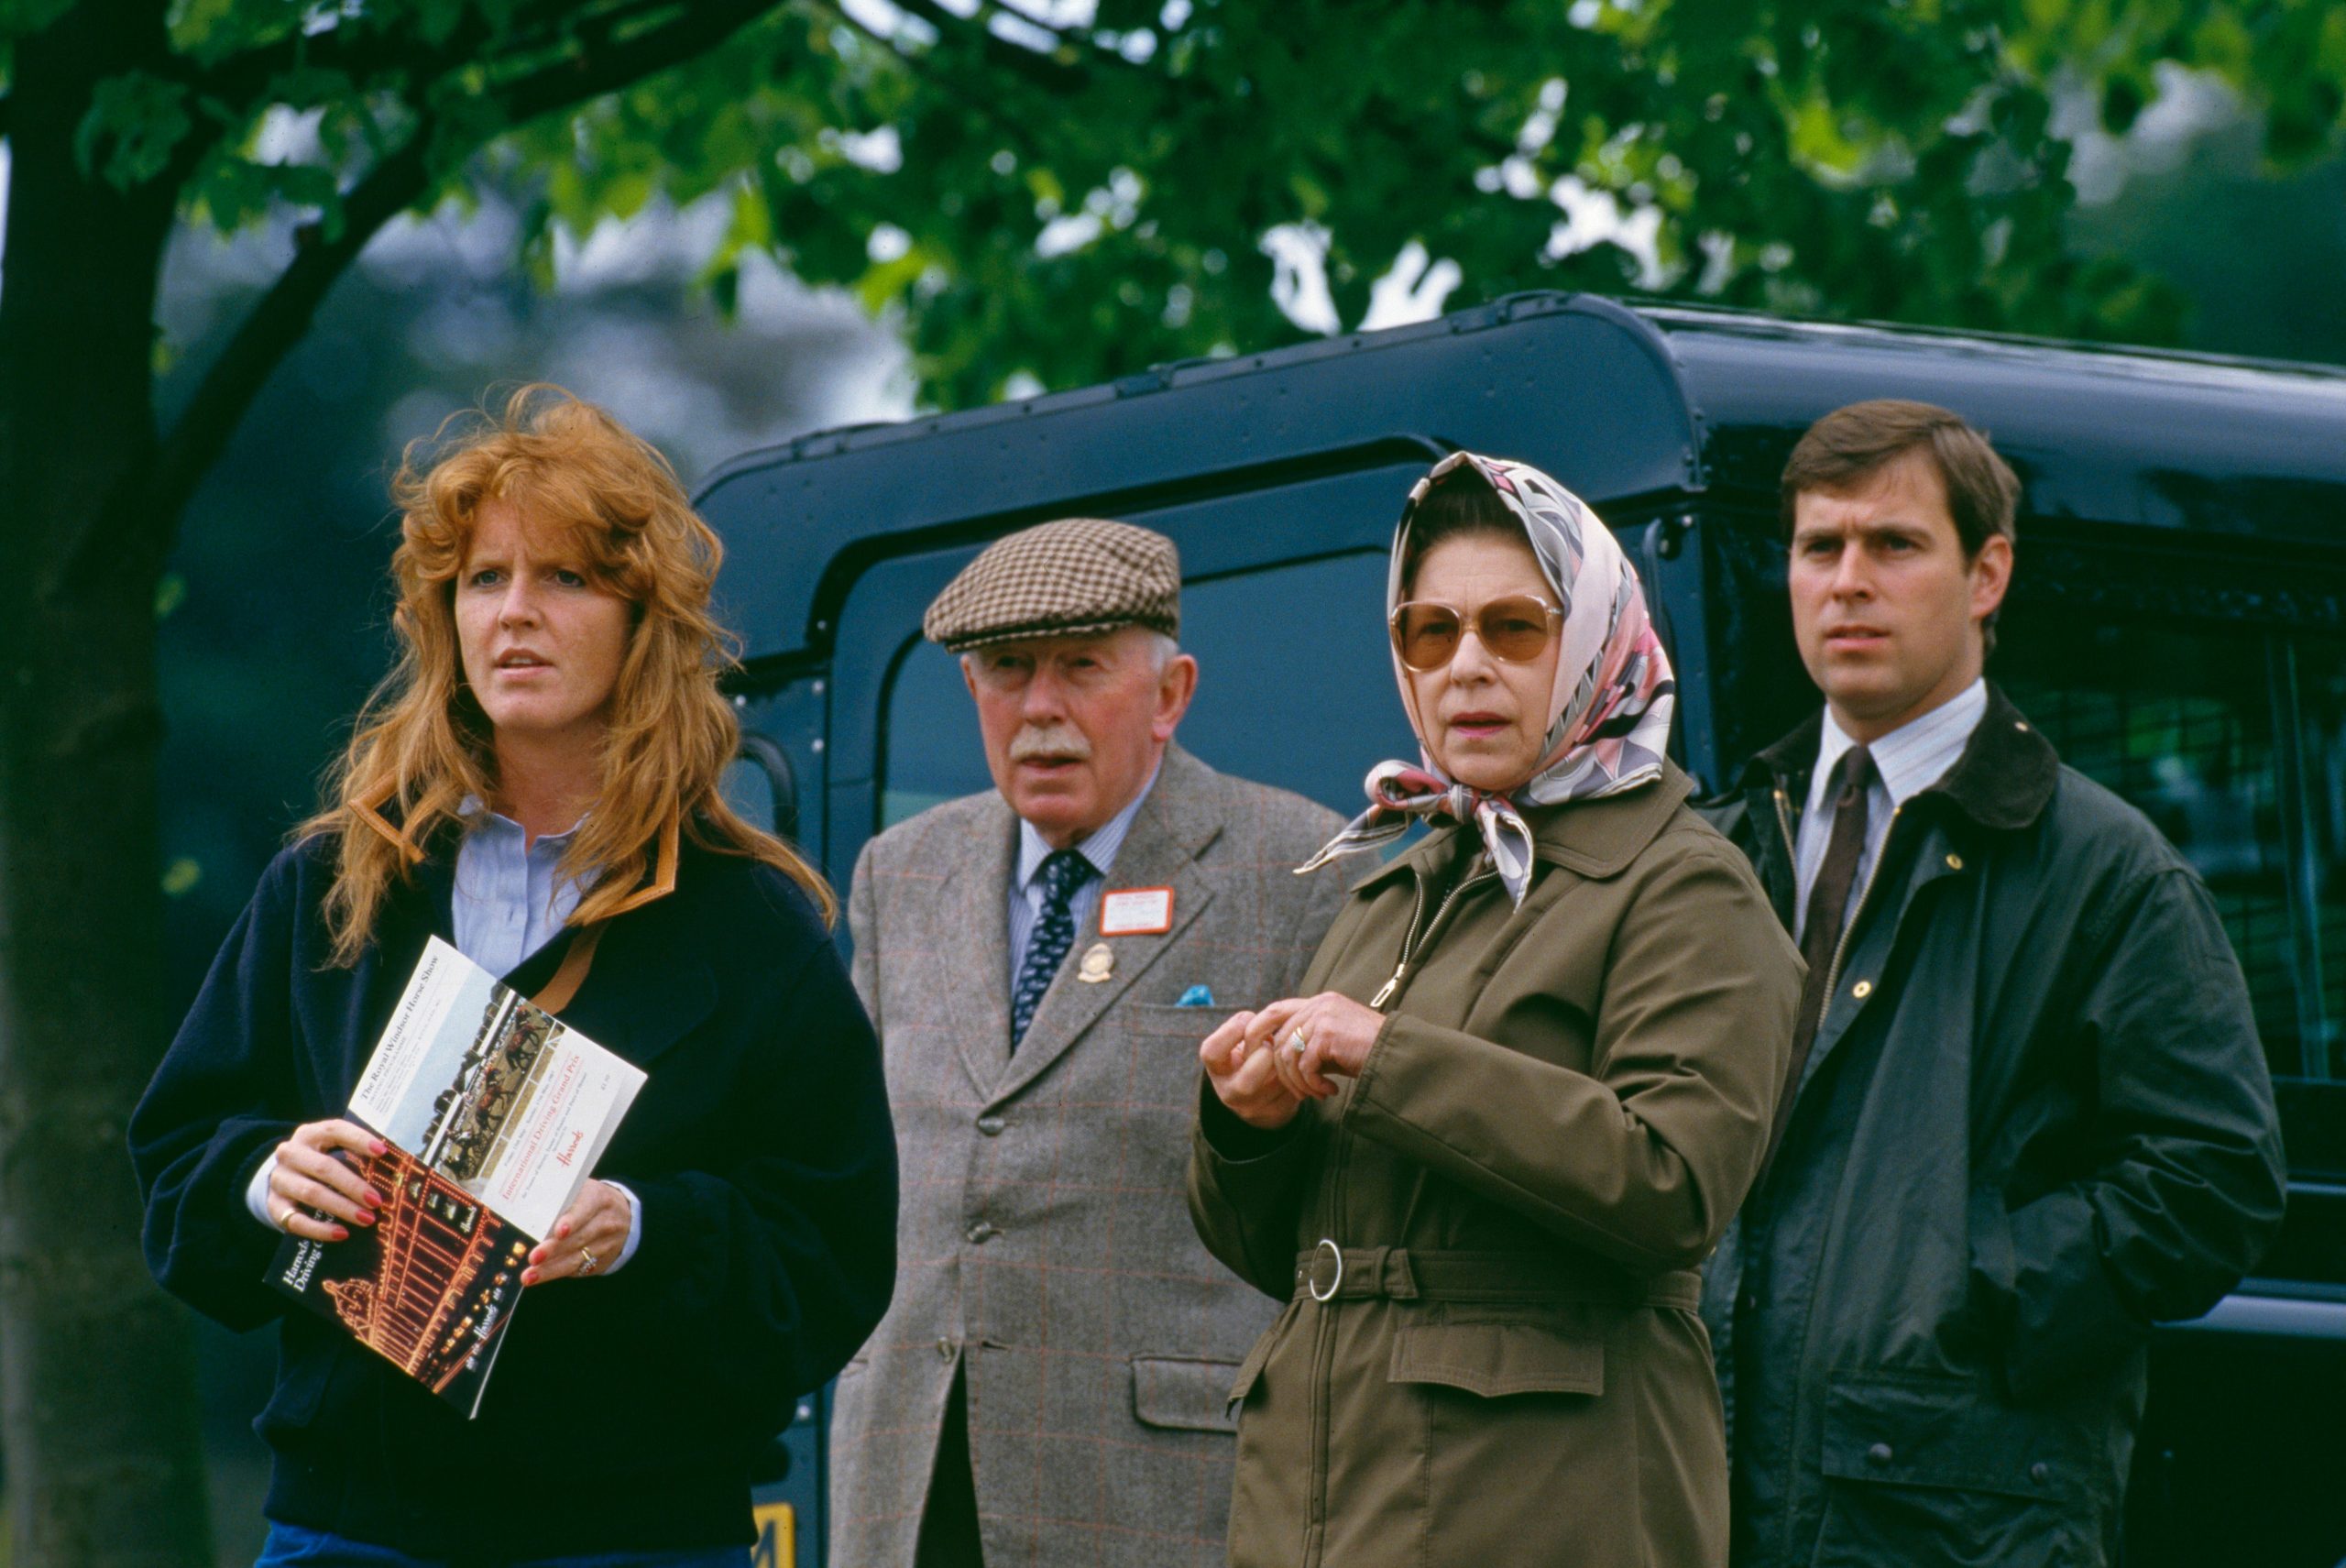 Sarah Ferguson, The Queen and Prince Andrew.